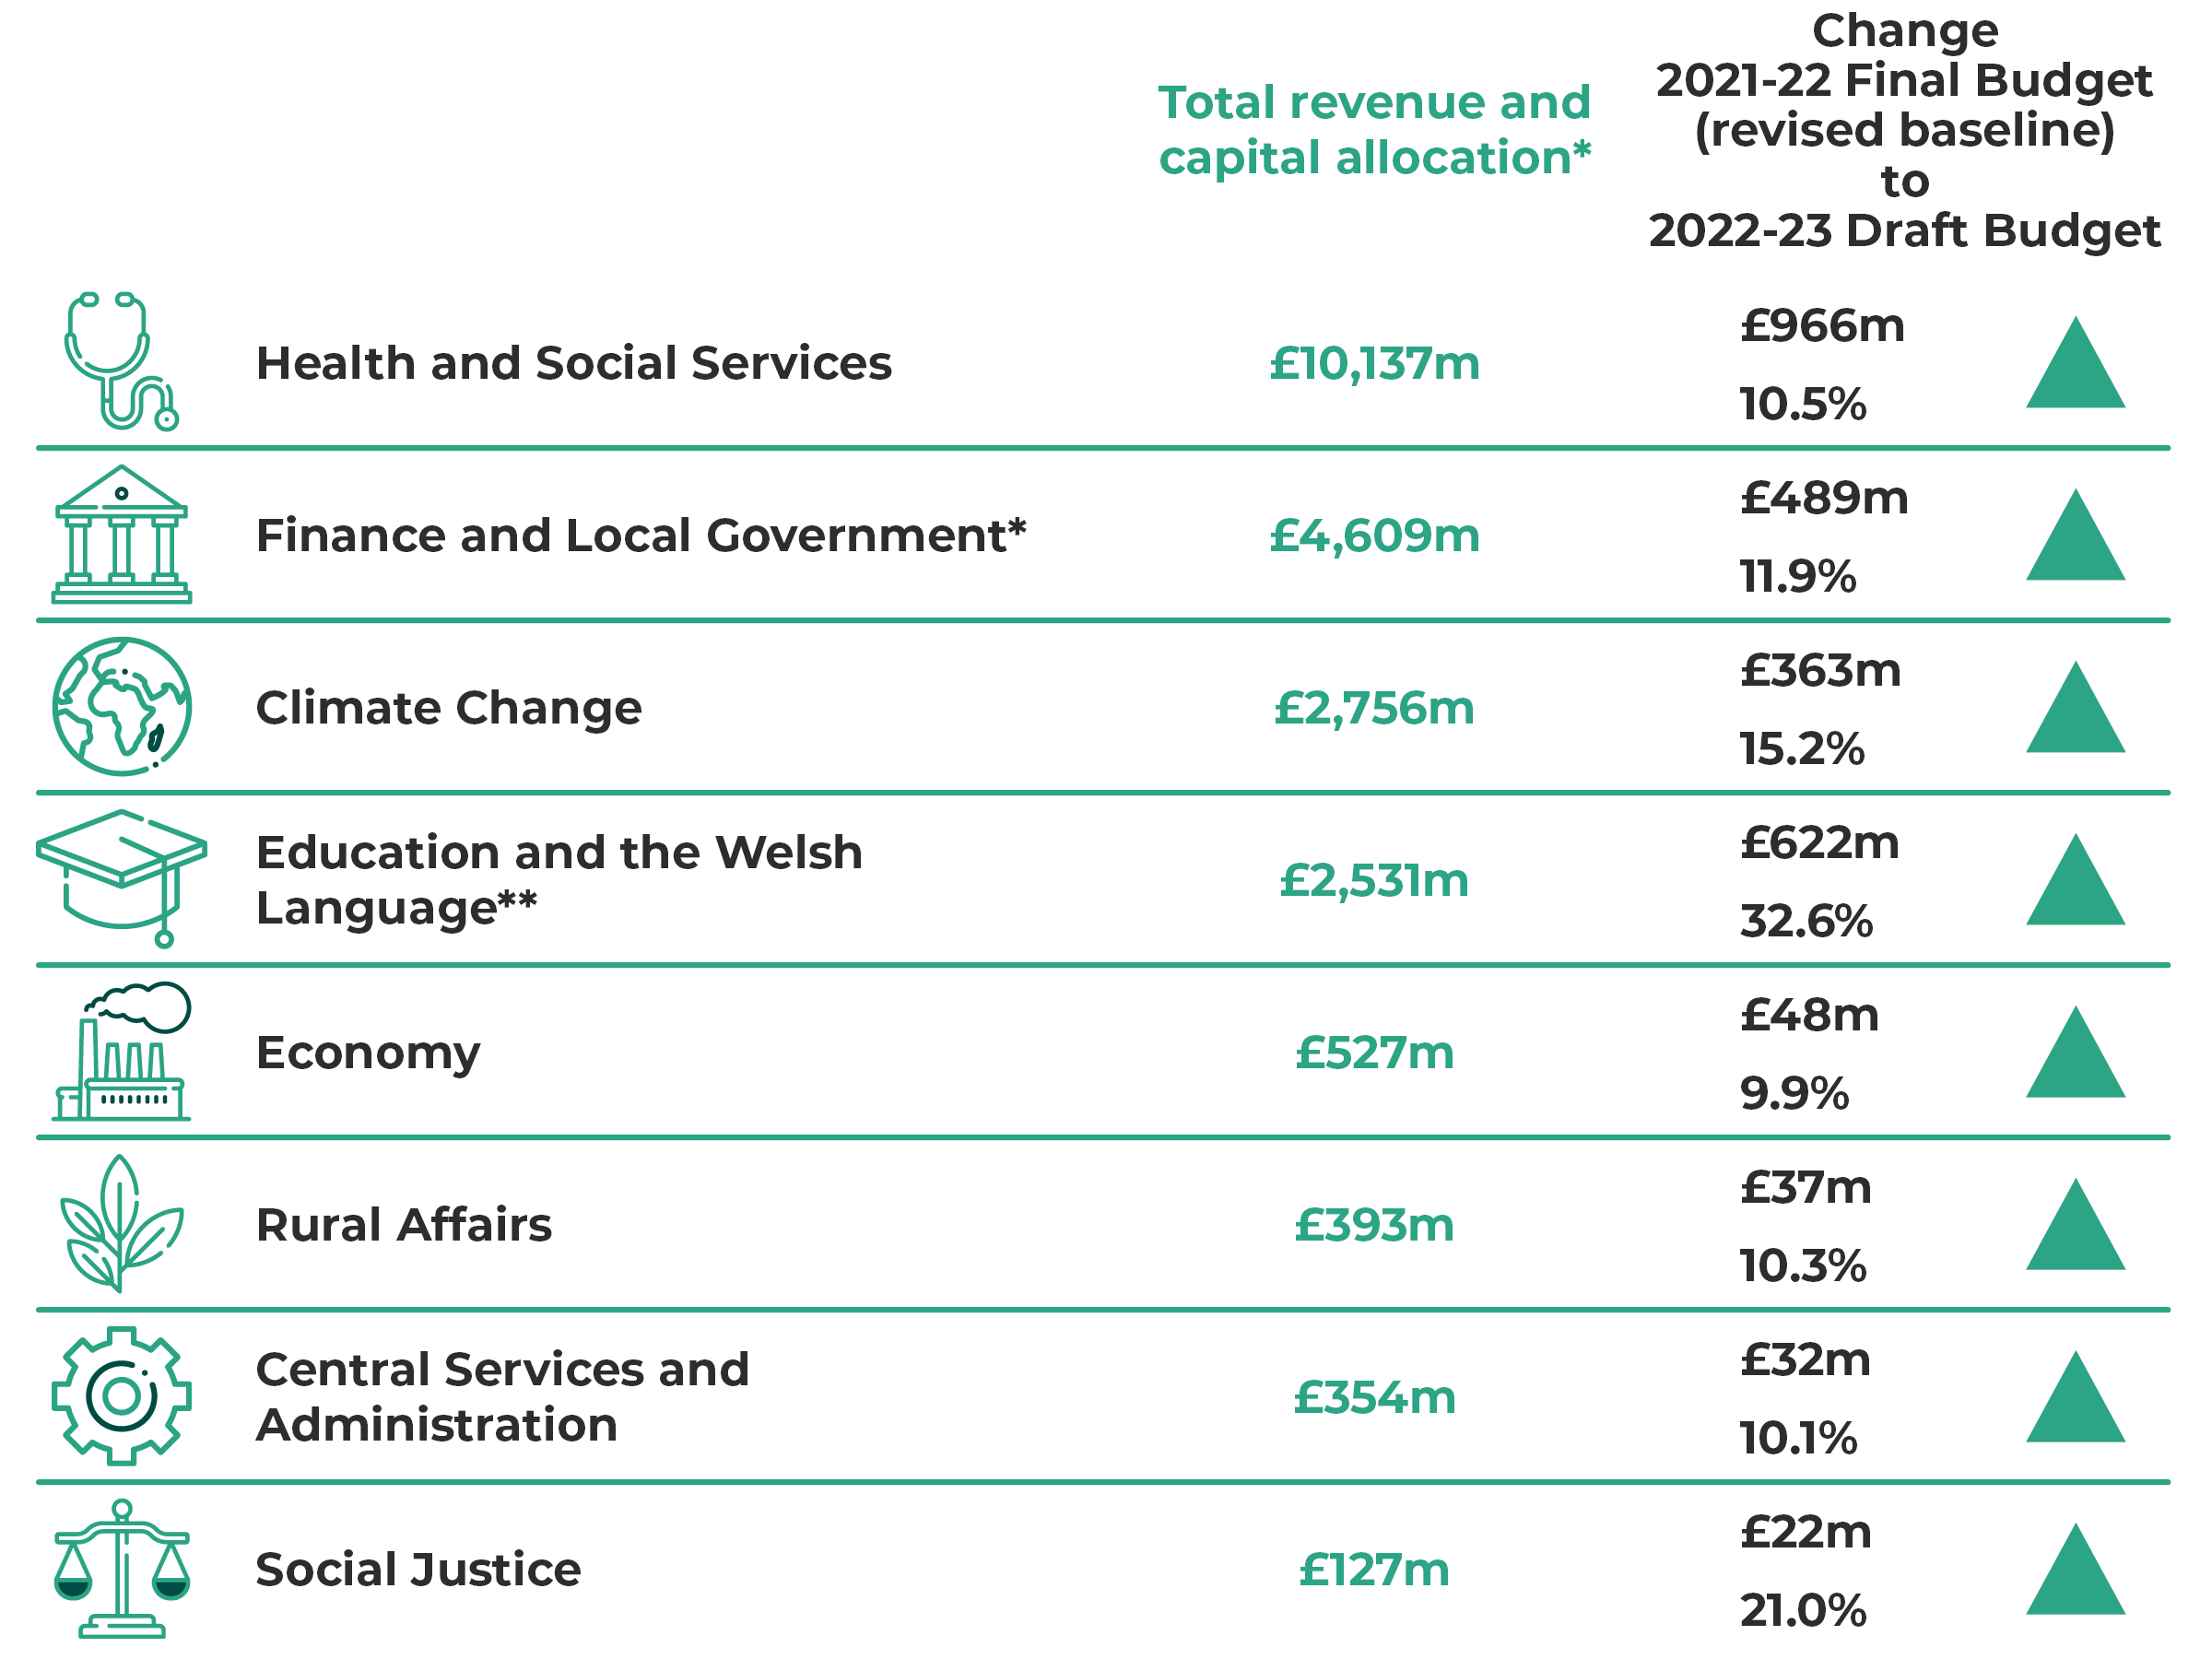 Table of total revenue and capital allocation by department. Health and Social Services: £10,137m (up by £966m or 10.5%). Finance and Local Government: £4,609m (up by £489m or 11.9%). Climate Change: £2,756m (up by £363m or 15.2%). Education and the Welsh Language: £2,531m (up by £622m or 32.6%). Economy: £527m (up by £48m or 9.9%). Rural Affairs: £393m (up by £37m or 10.3%). Central Services and Administration: £354m (up by £32m or 10.1%). Social Justice: £127m (up by £22m or 21.0%).